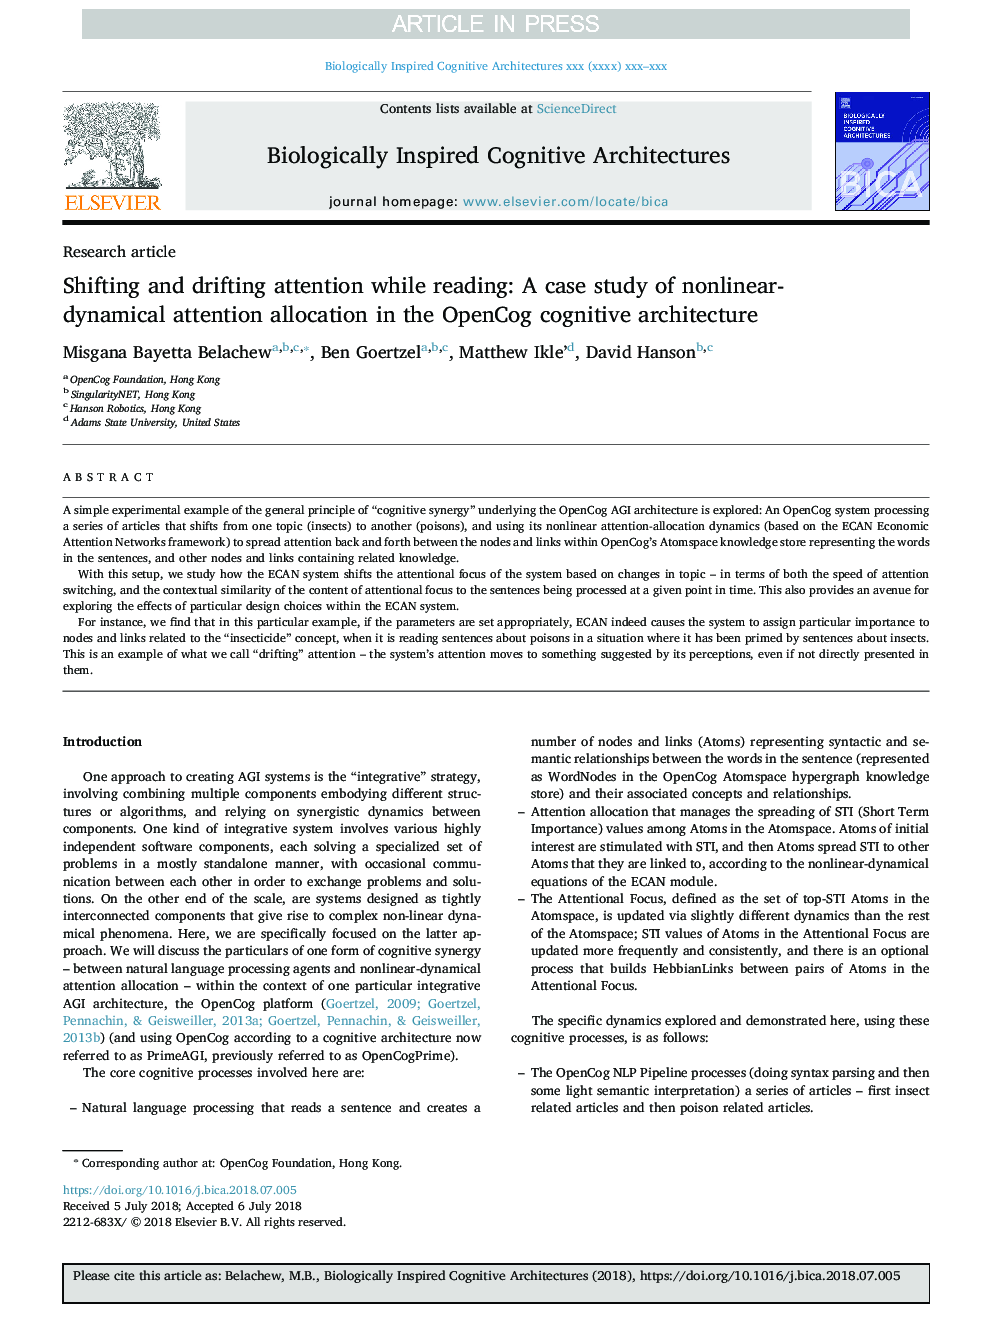 Shifting and drifting attention while reading: A case study of nonlinear-dynamical attention allocation in the OpenCog cognitive architecture